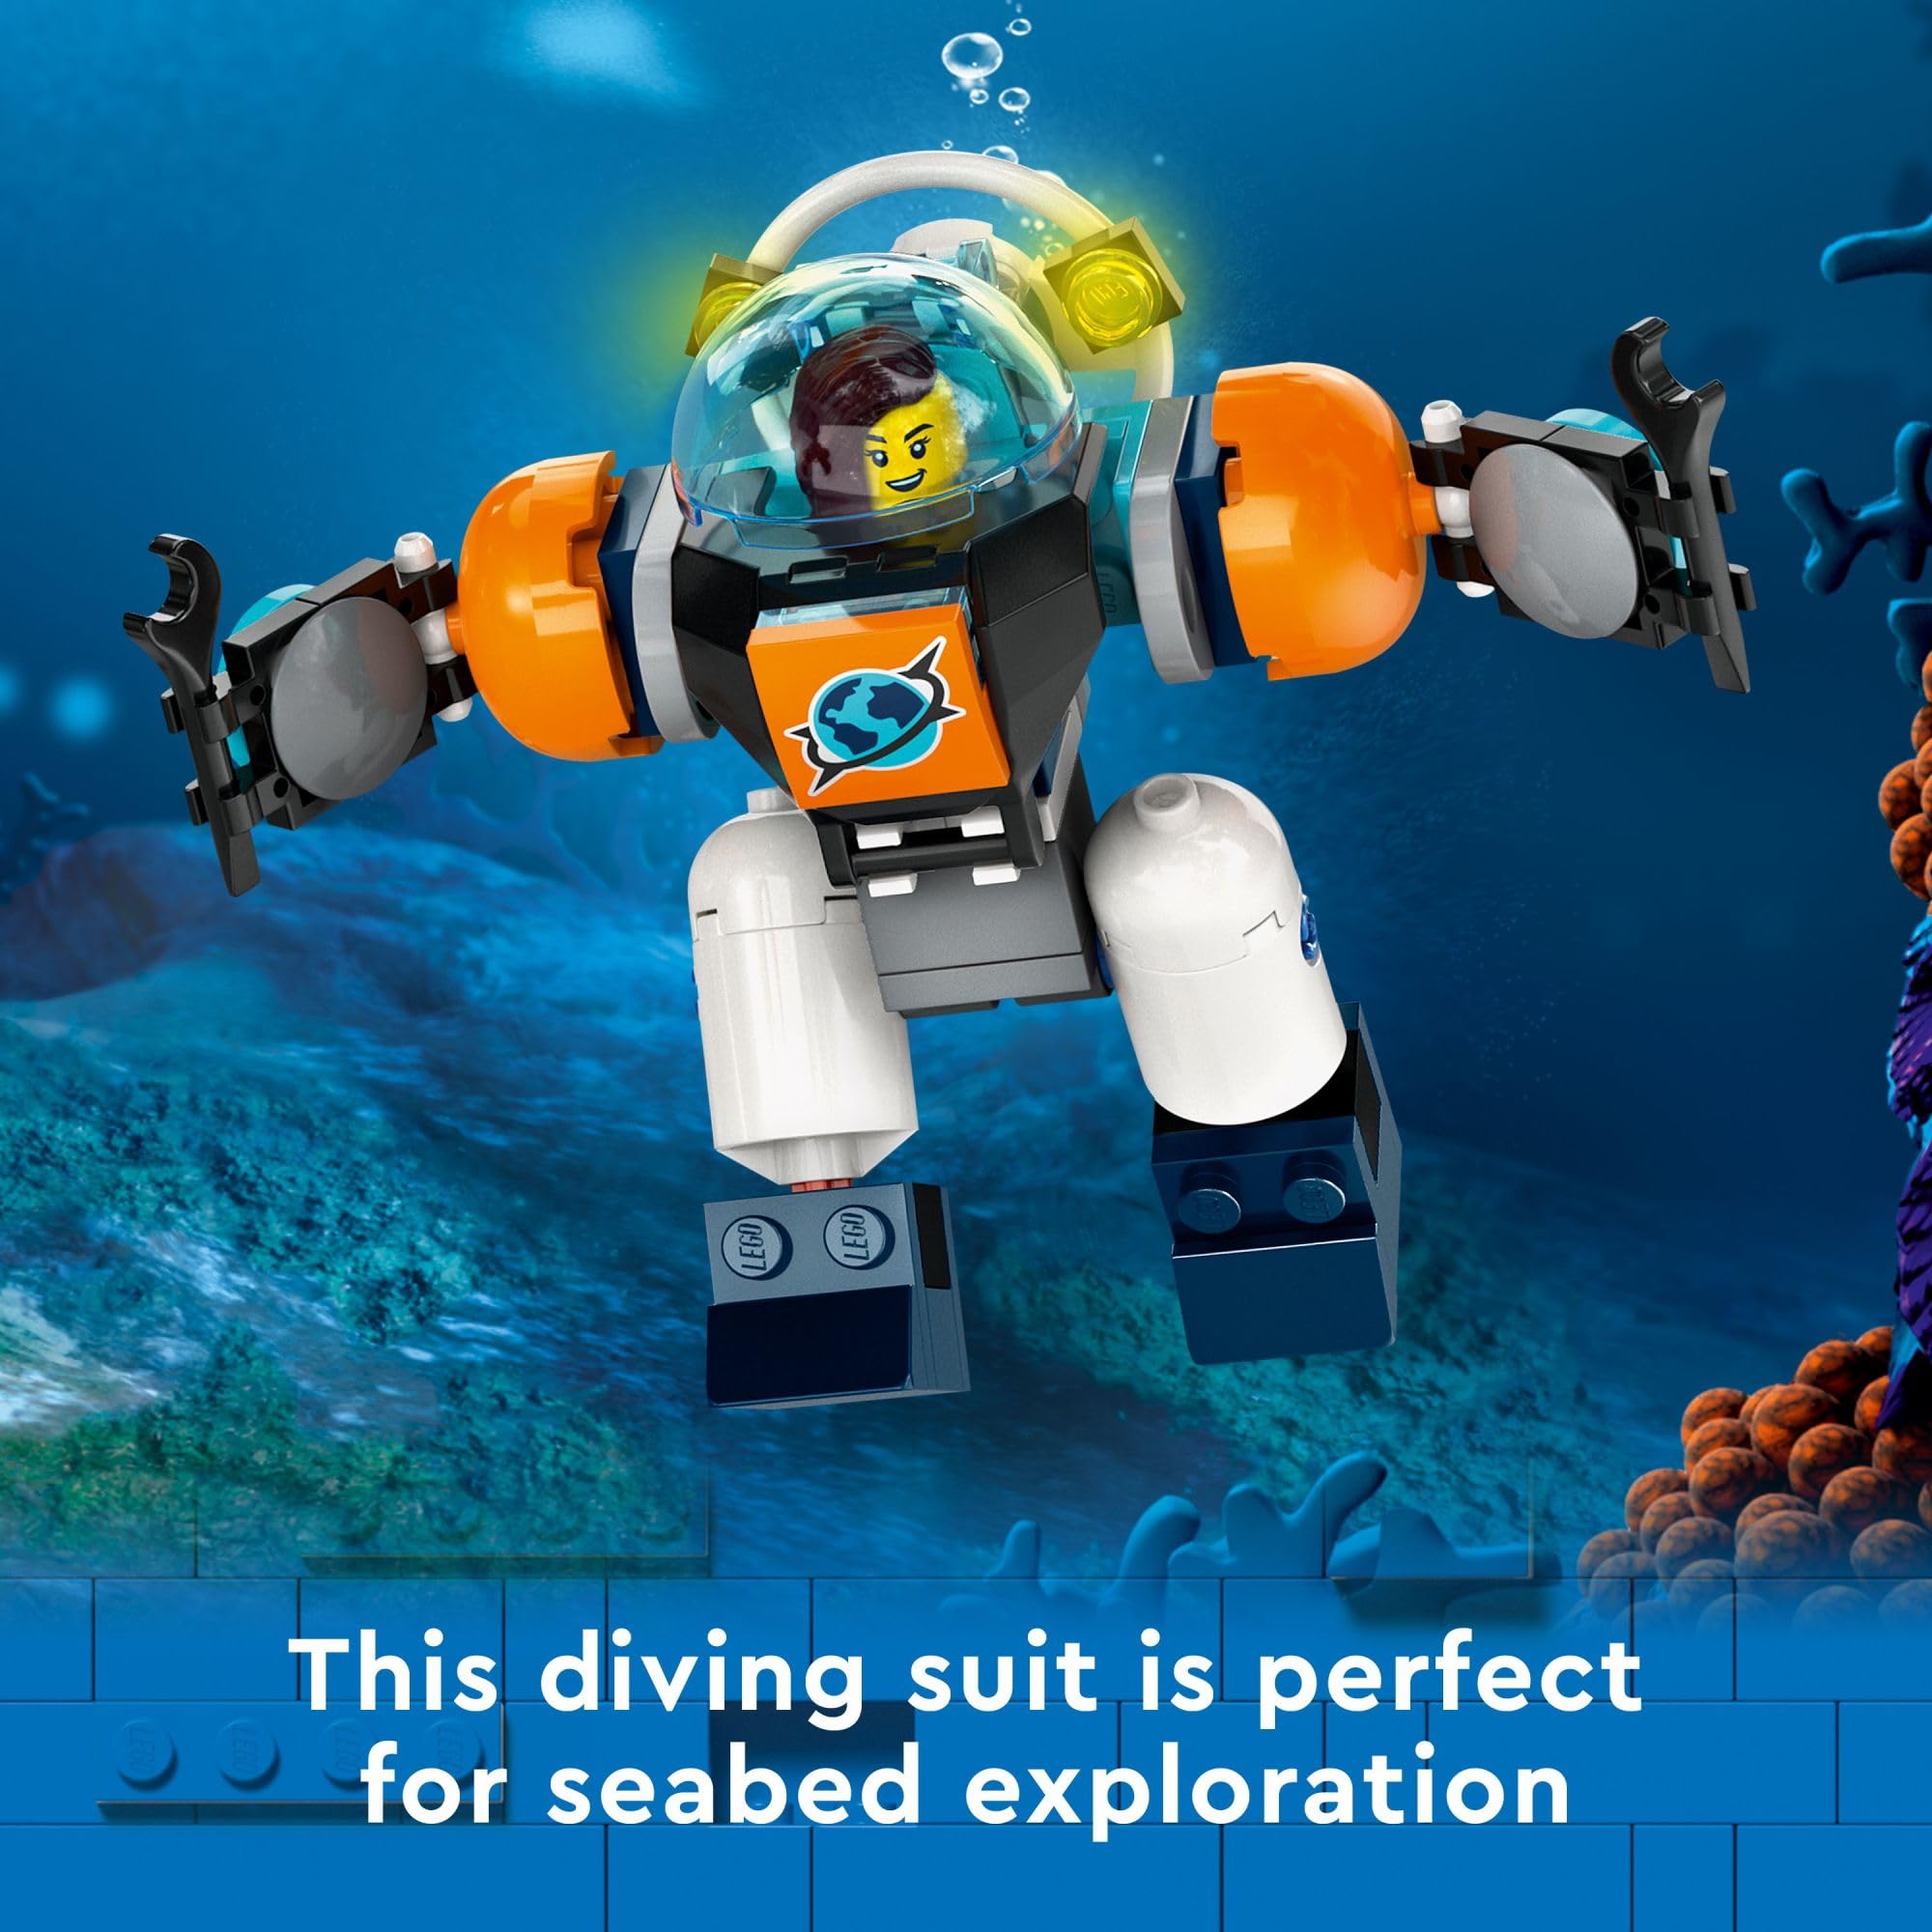 LEGO City Deep-Sea Explorer Submarine 60379 Building Toy Set, Ocean Submarine Playset with Shipwreck Setting, 6 Minifigures and 3 Shark Figures for Imaginative Play, A Gift Idea for Ages 7+